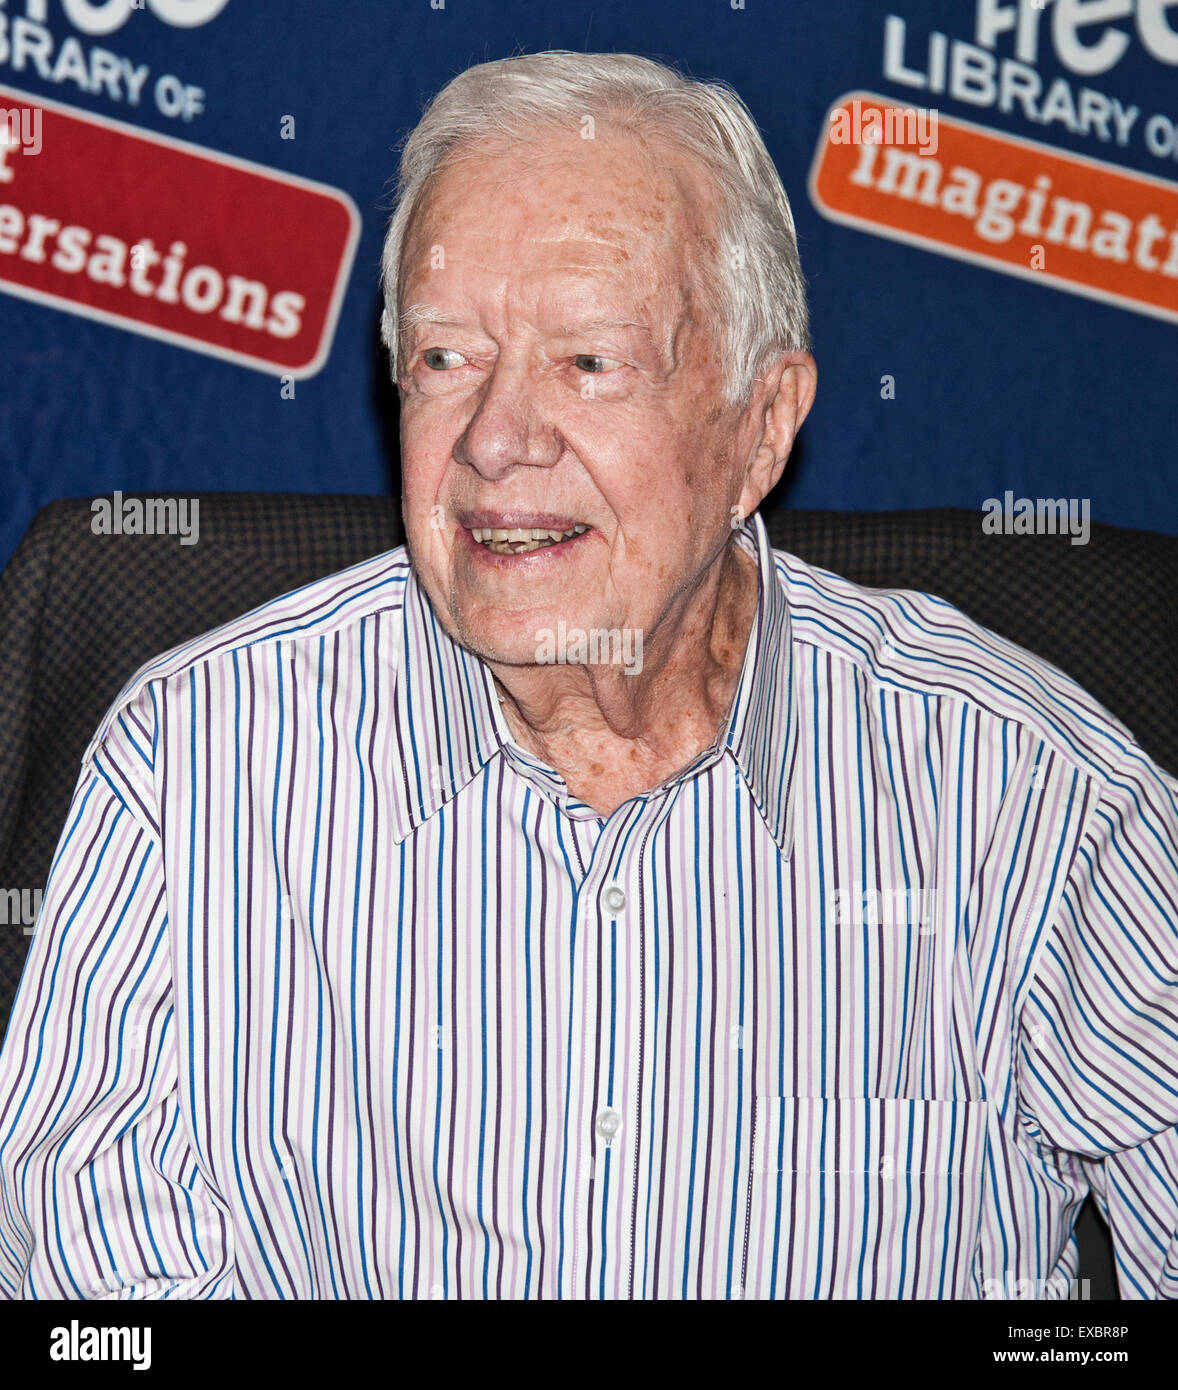 Philadelphia, Pennsylvania, USA. 10th July, 2015. Former President Jimmy Carter Signs His New Book "A Full Life: Reflections at Ninety" at The Free Library of Philadelphia on July 10, 2015 in Philadelphia, Pennsylvania, United States. Credit:  Paul Froggatt/Alamy Live News Stock Photo